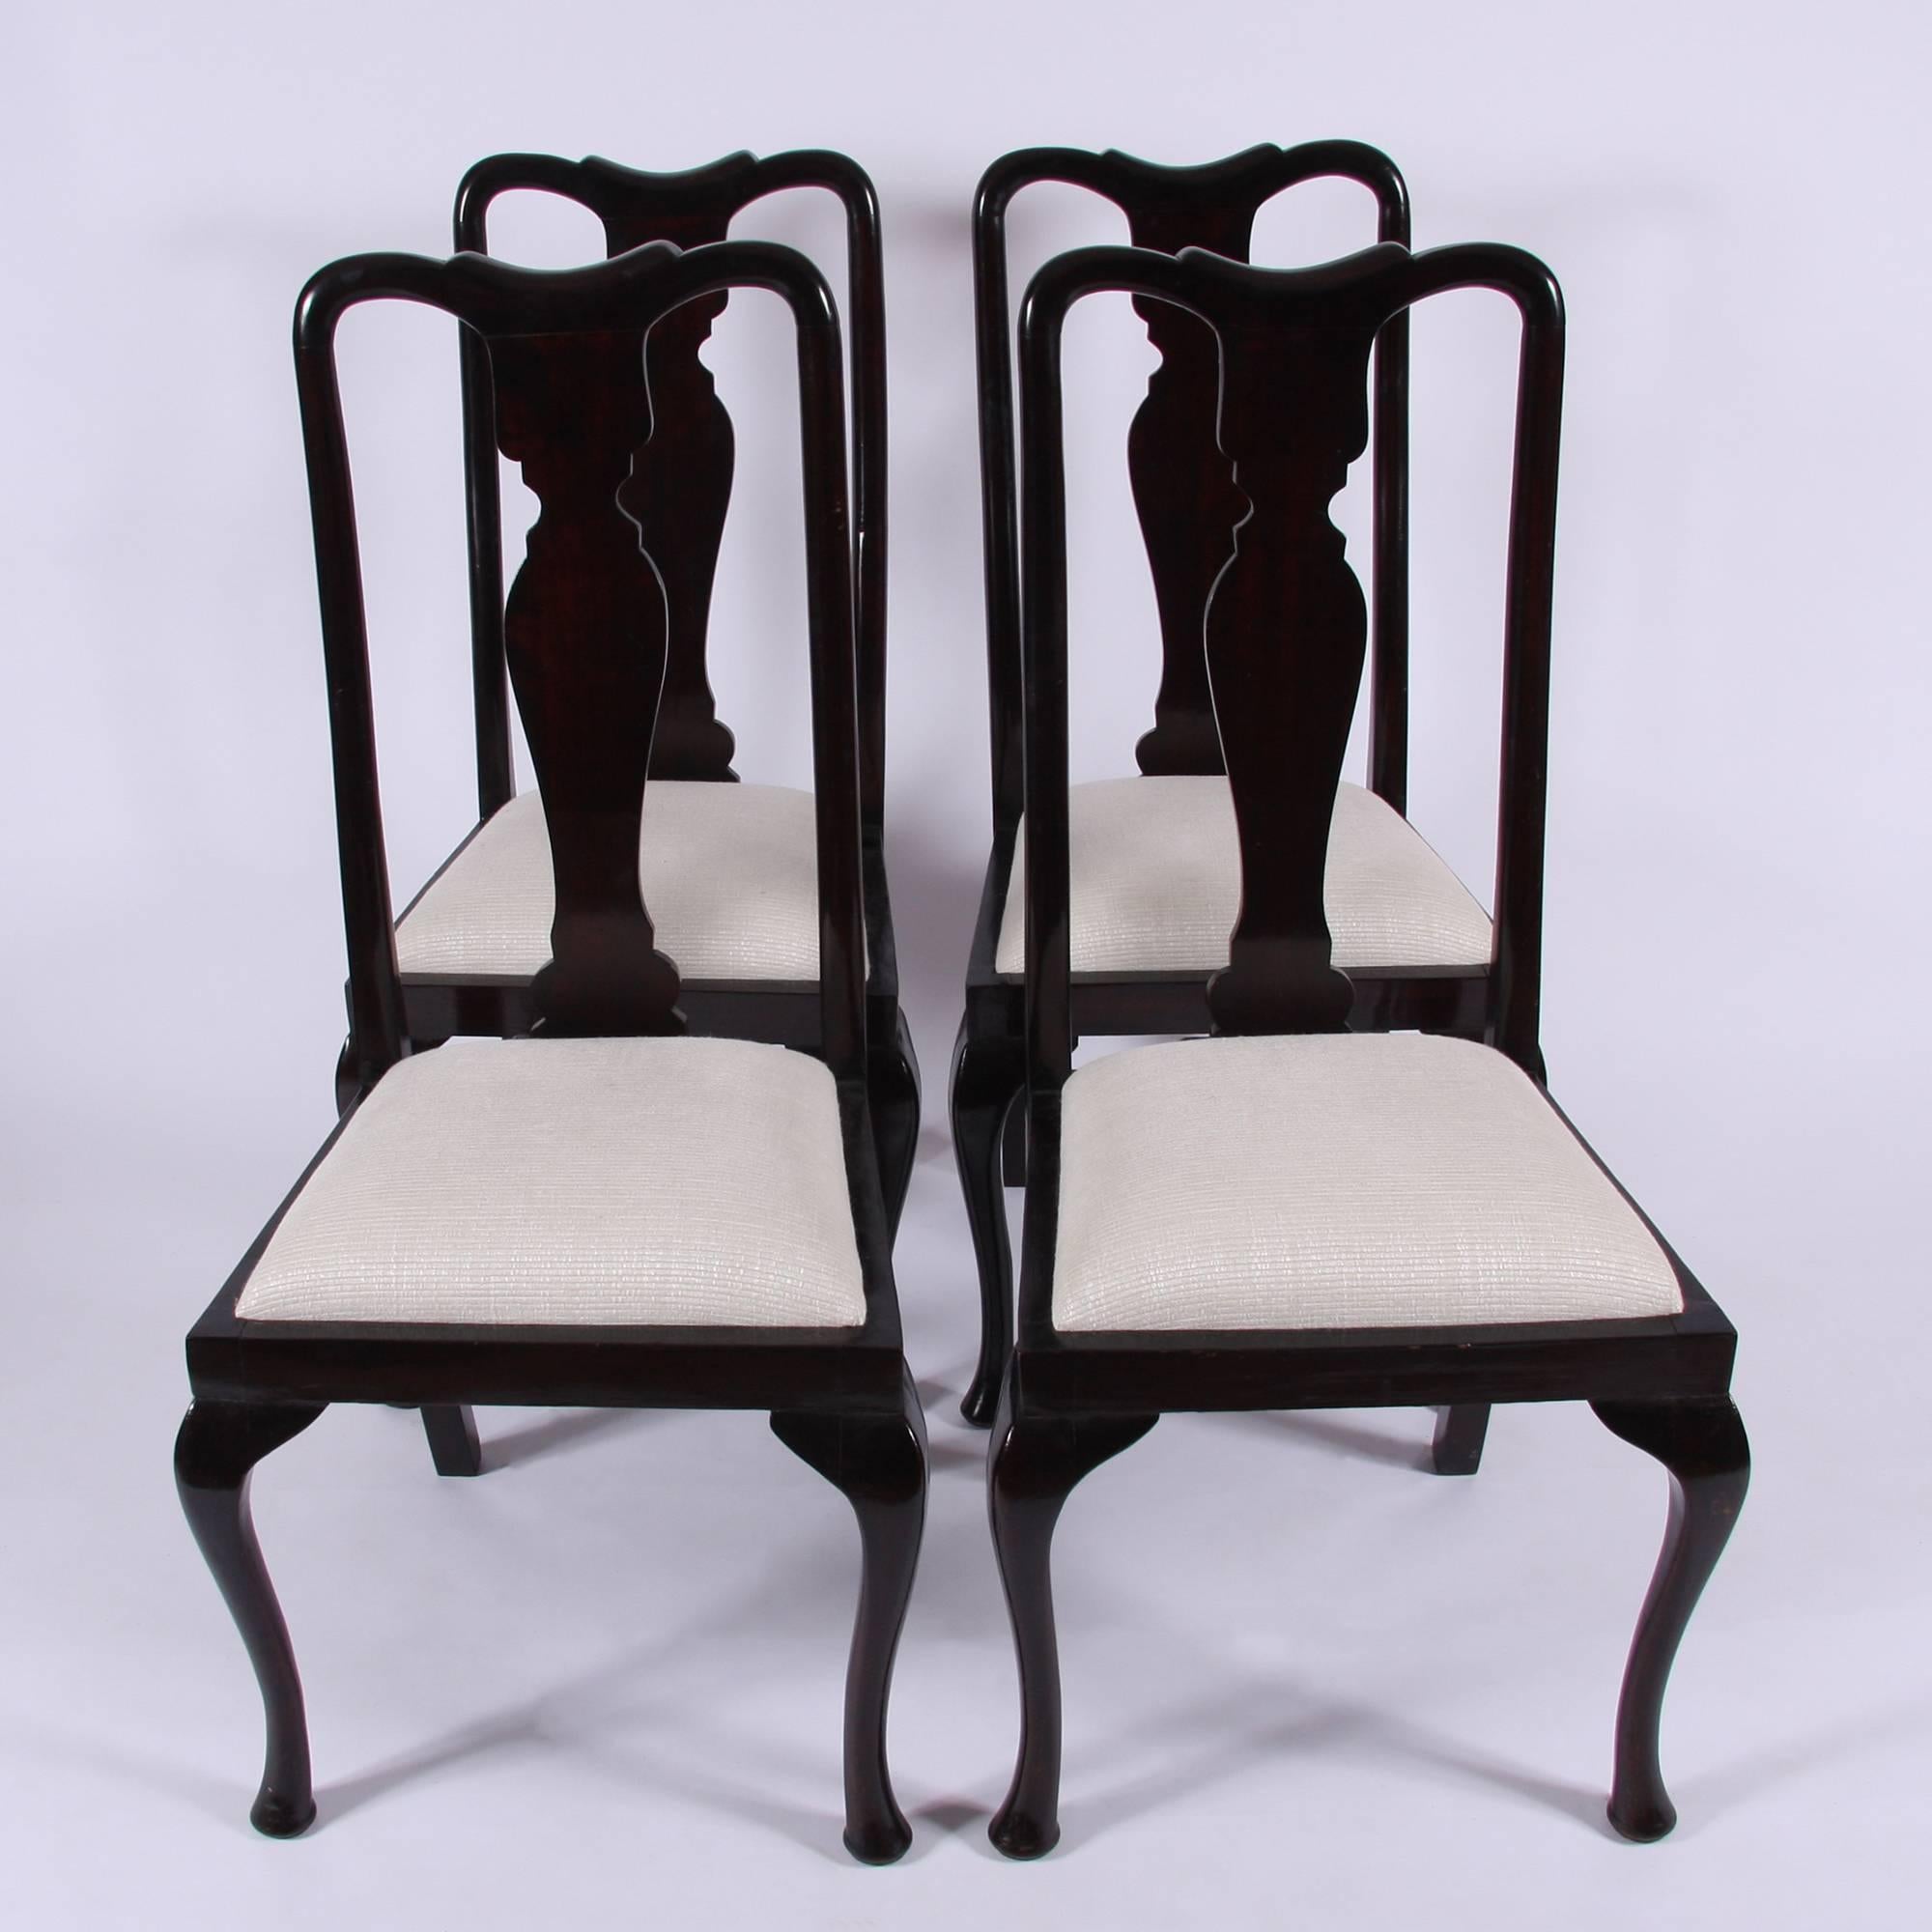 A stunning set of four early 20th century English Queen Anne style chairs in mahogany with newly upholstered seat pads.